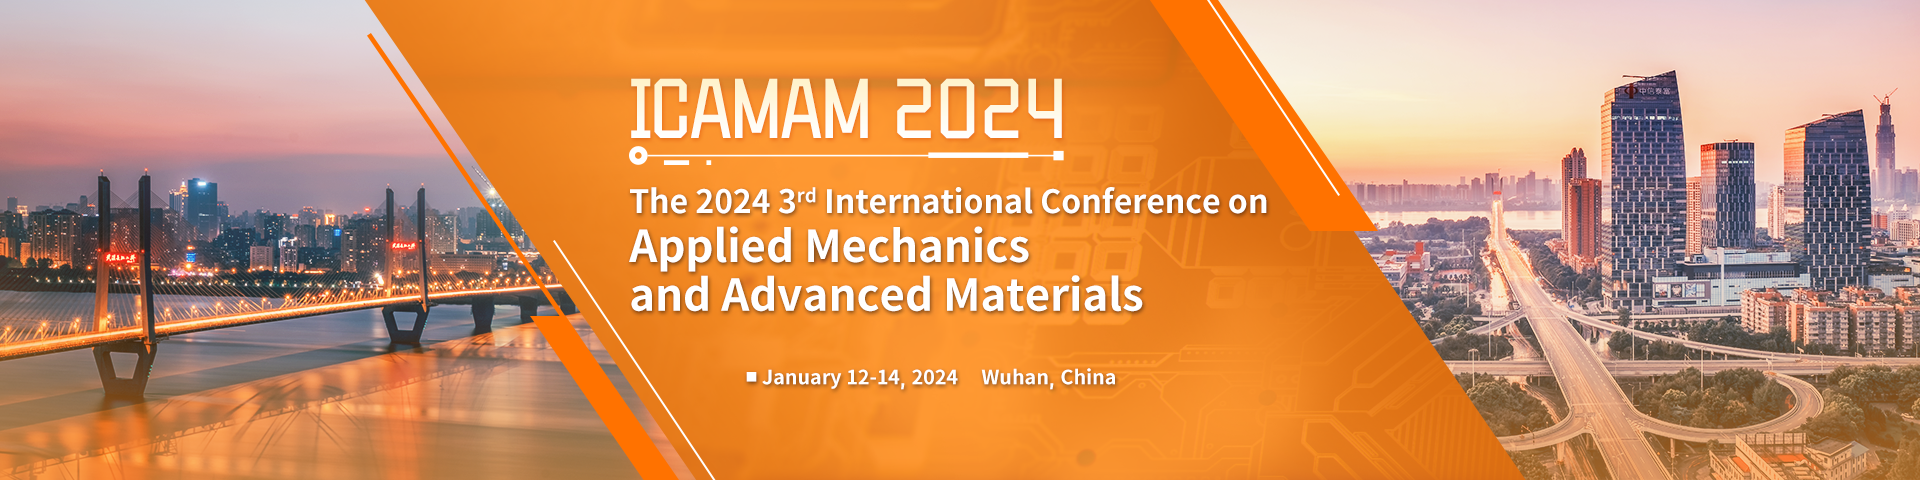 2024 2nd International Conference on Applied Mechanics and Advanced Materials（ICAMAM 2024）, Wuhan, Hubei, China